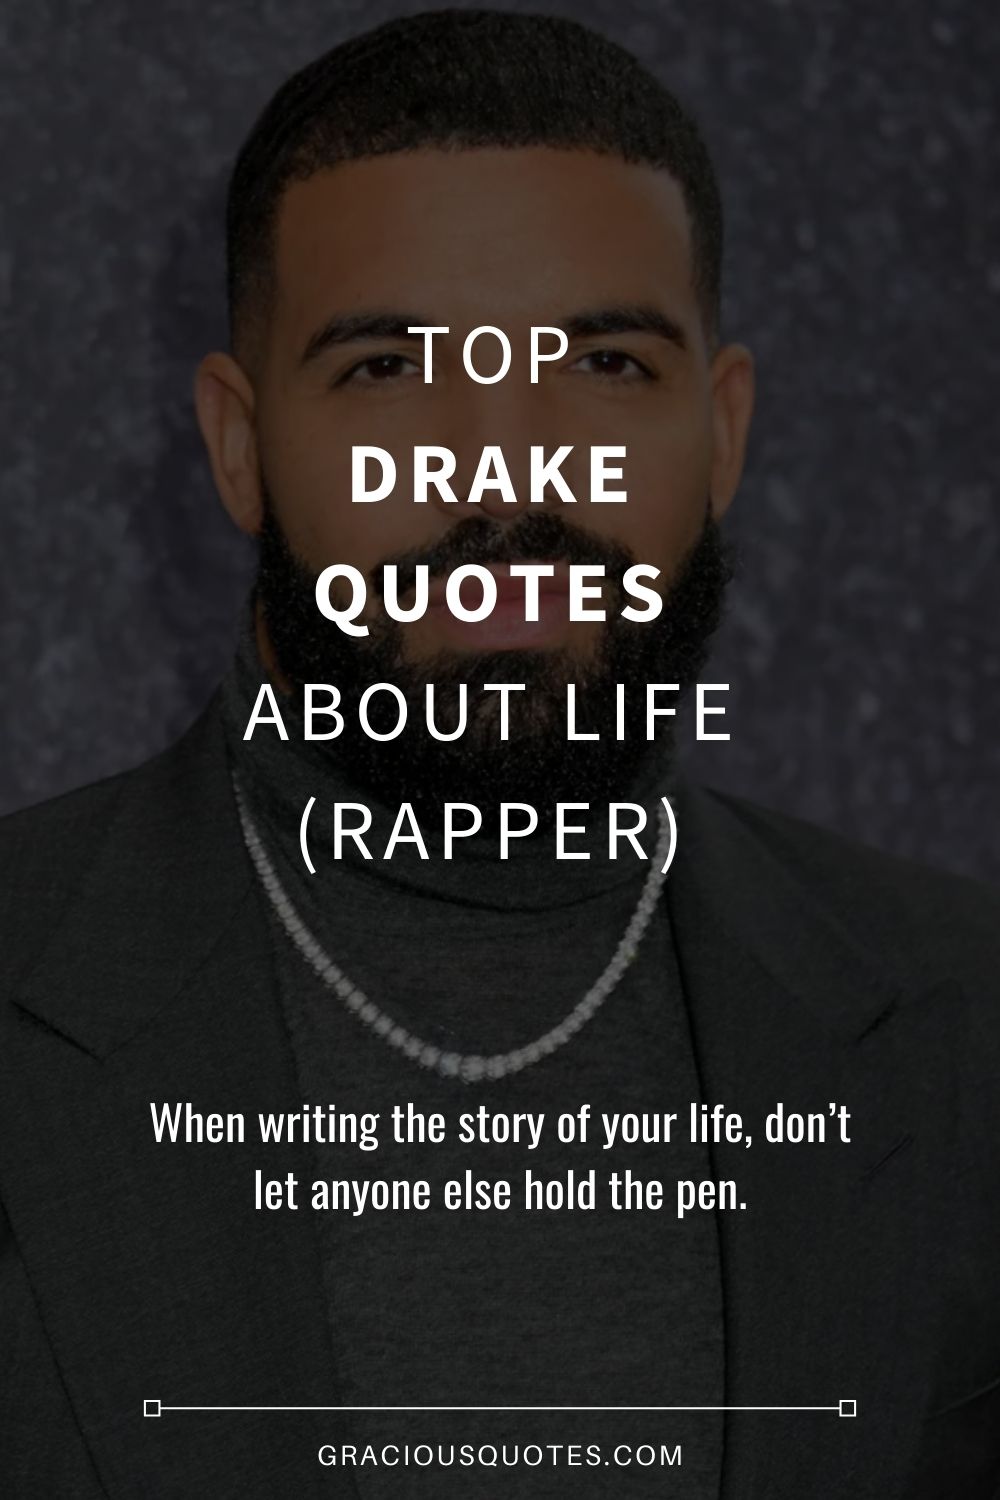 Top Drake Quotes About Life (RAPPER) - Gracious Quotes